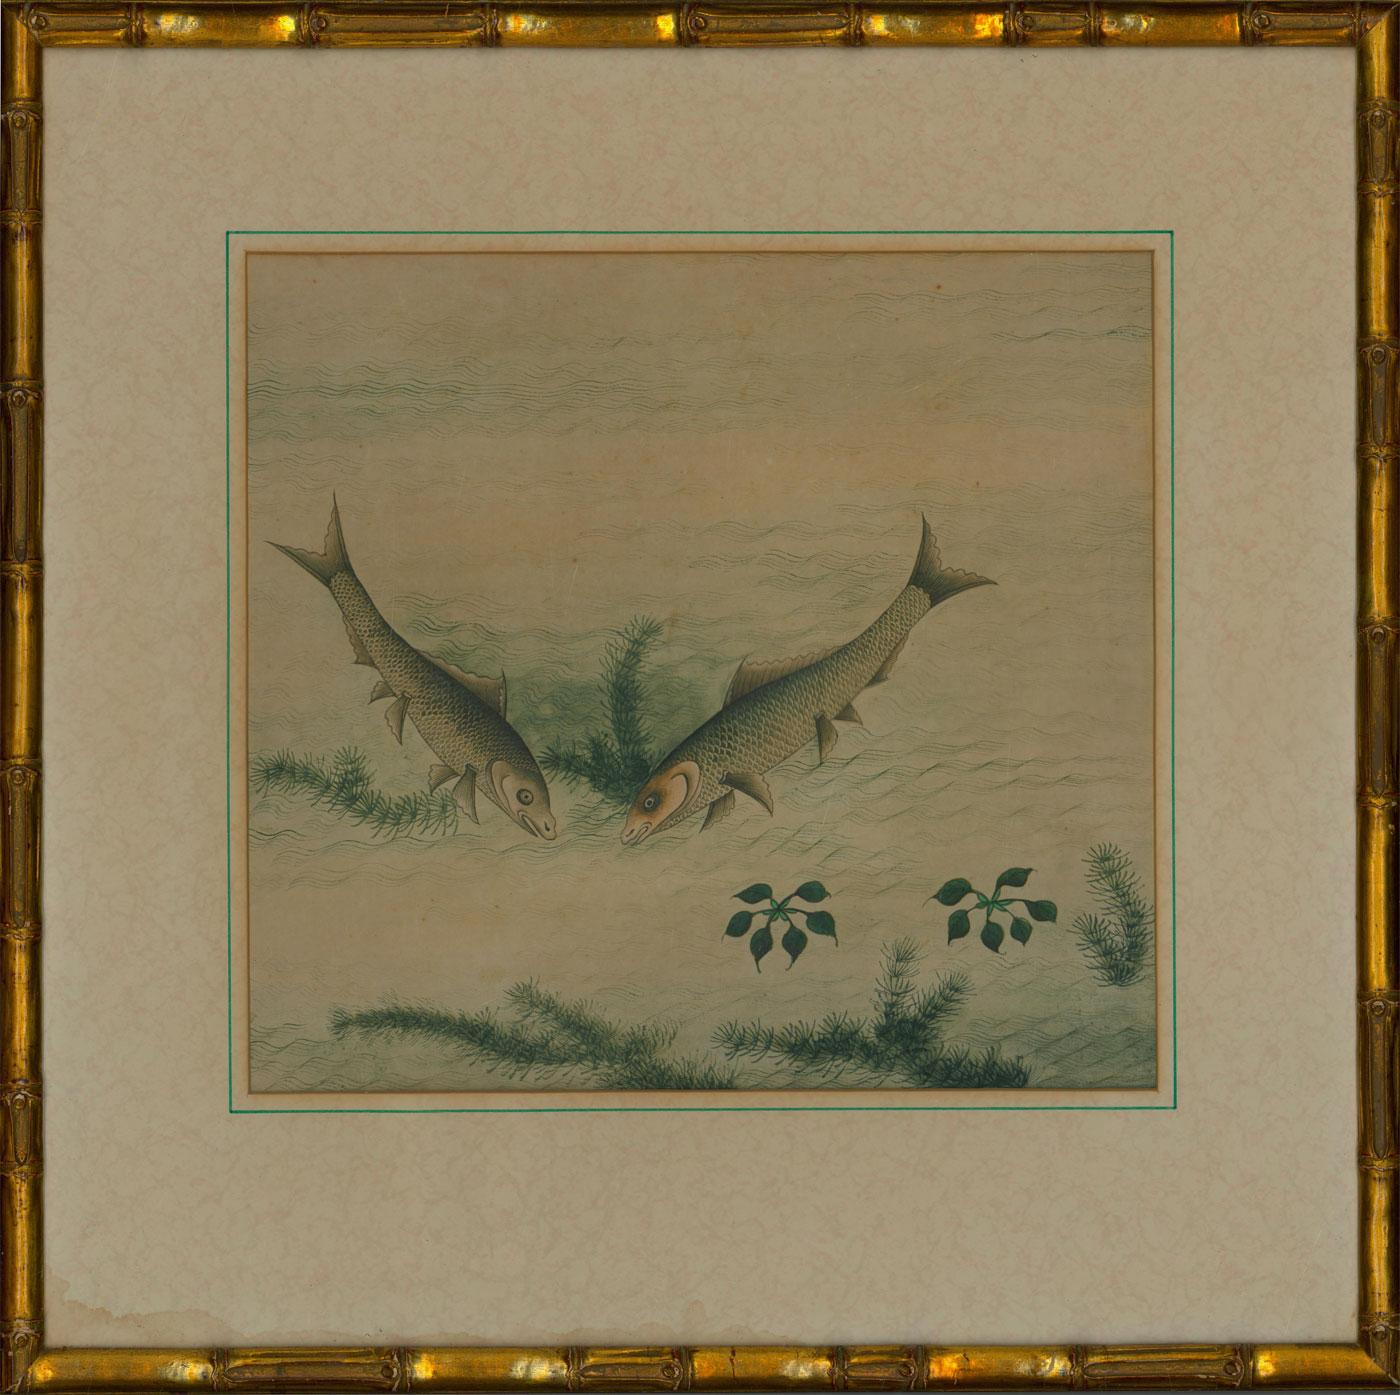 Unknown Animal Art - Early 20th Century Watercolour - Two Fish with Foliage